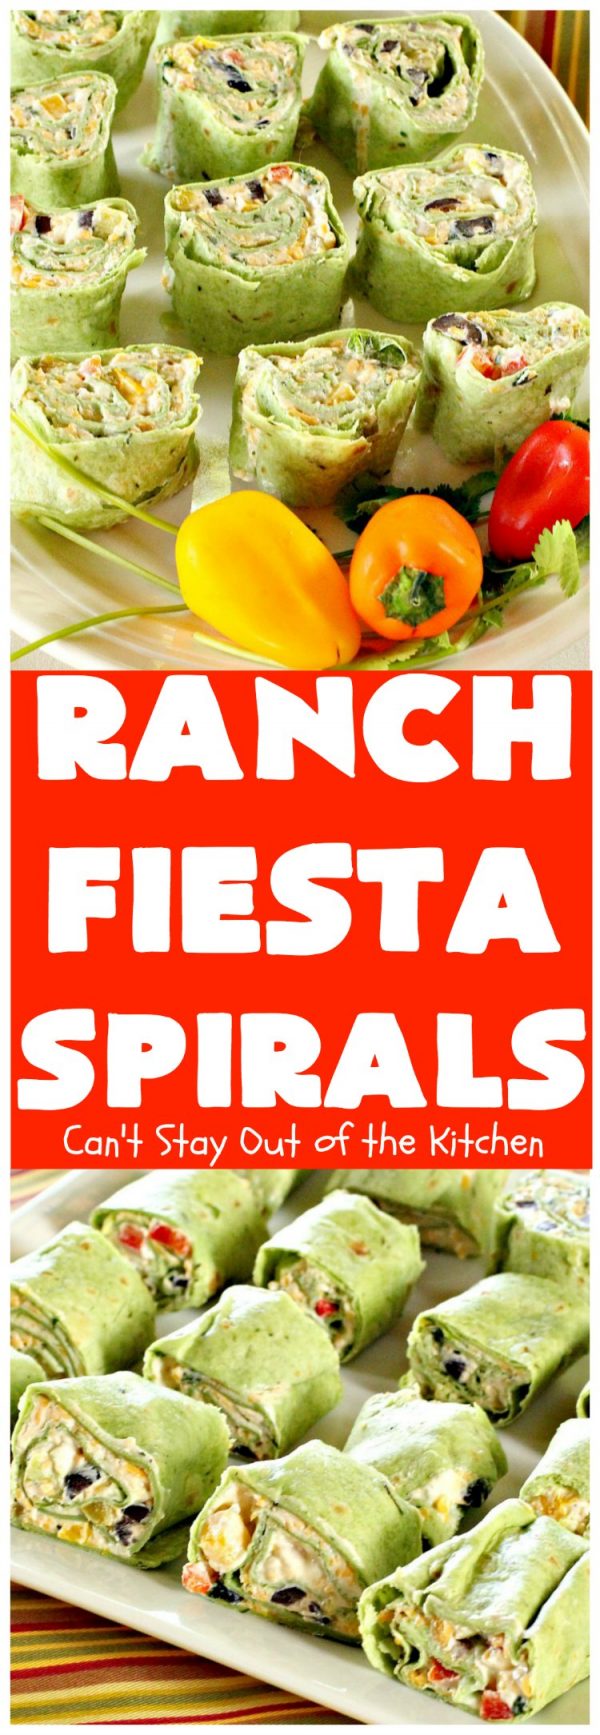 Ranch Fiesta Spirals – Can't Stay Out of the Kitchen